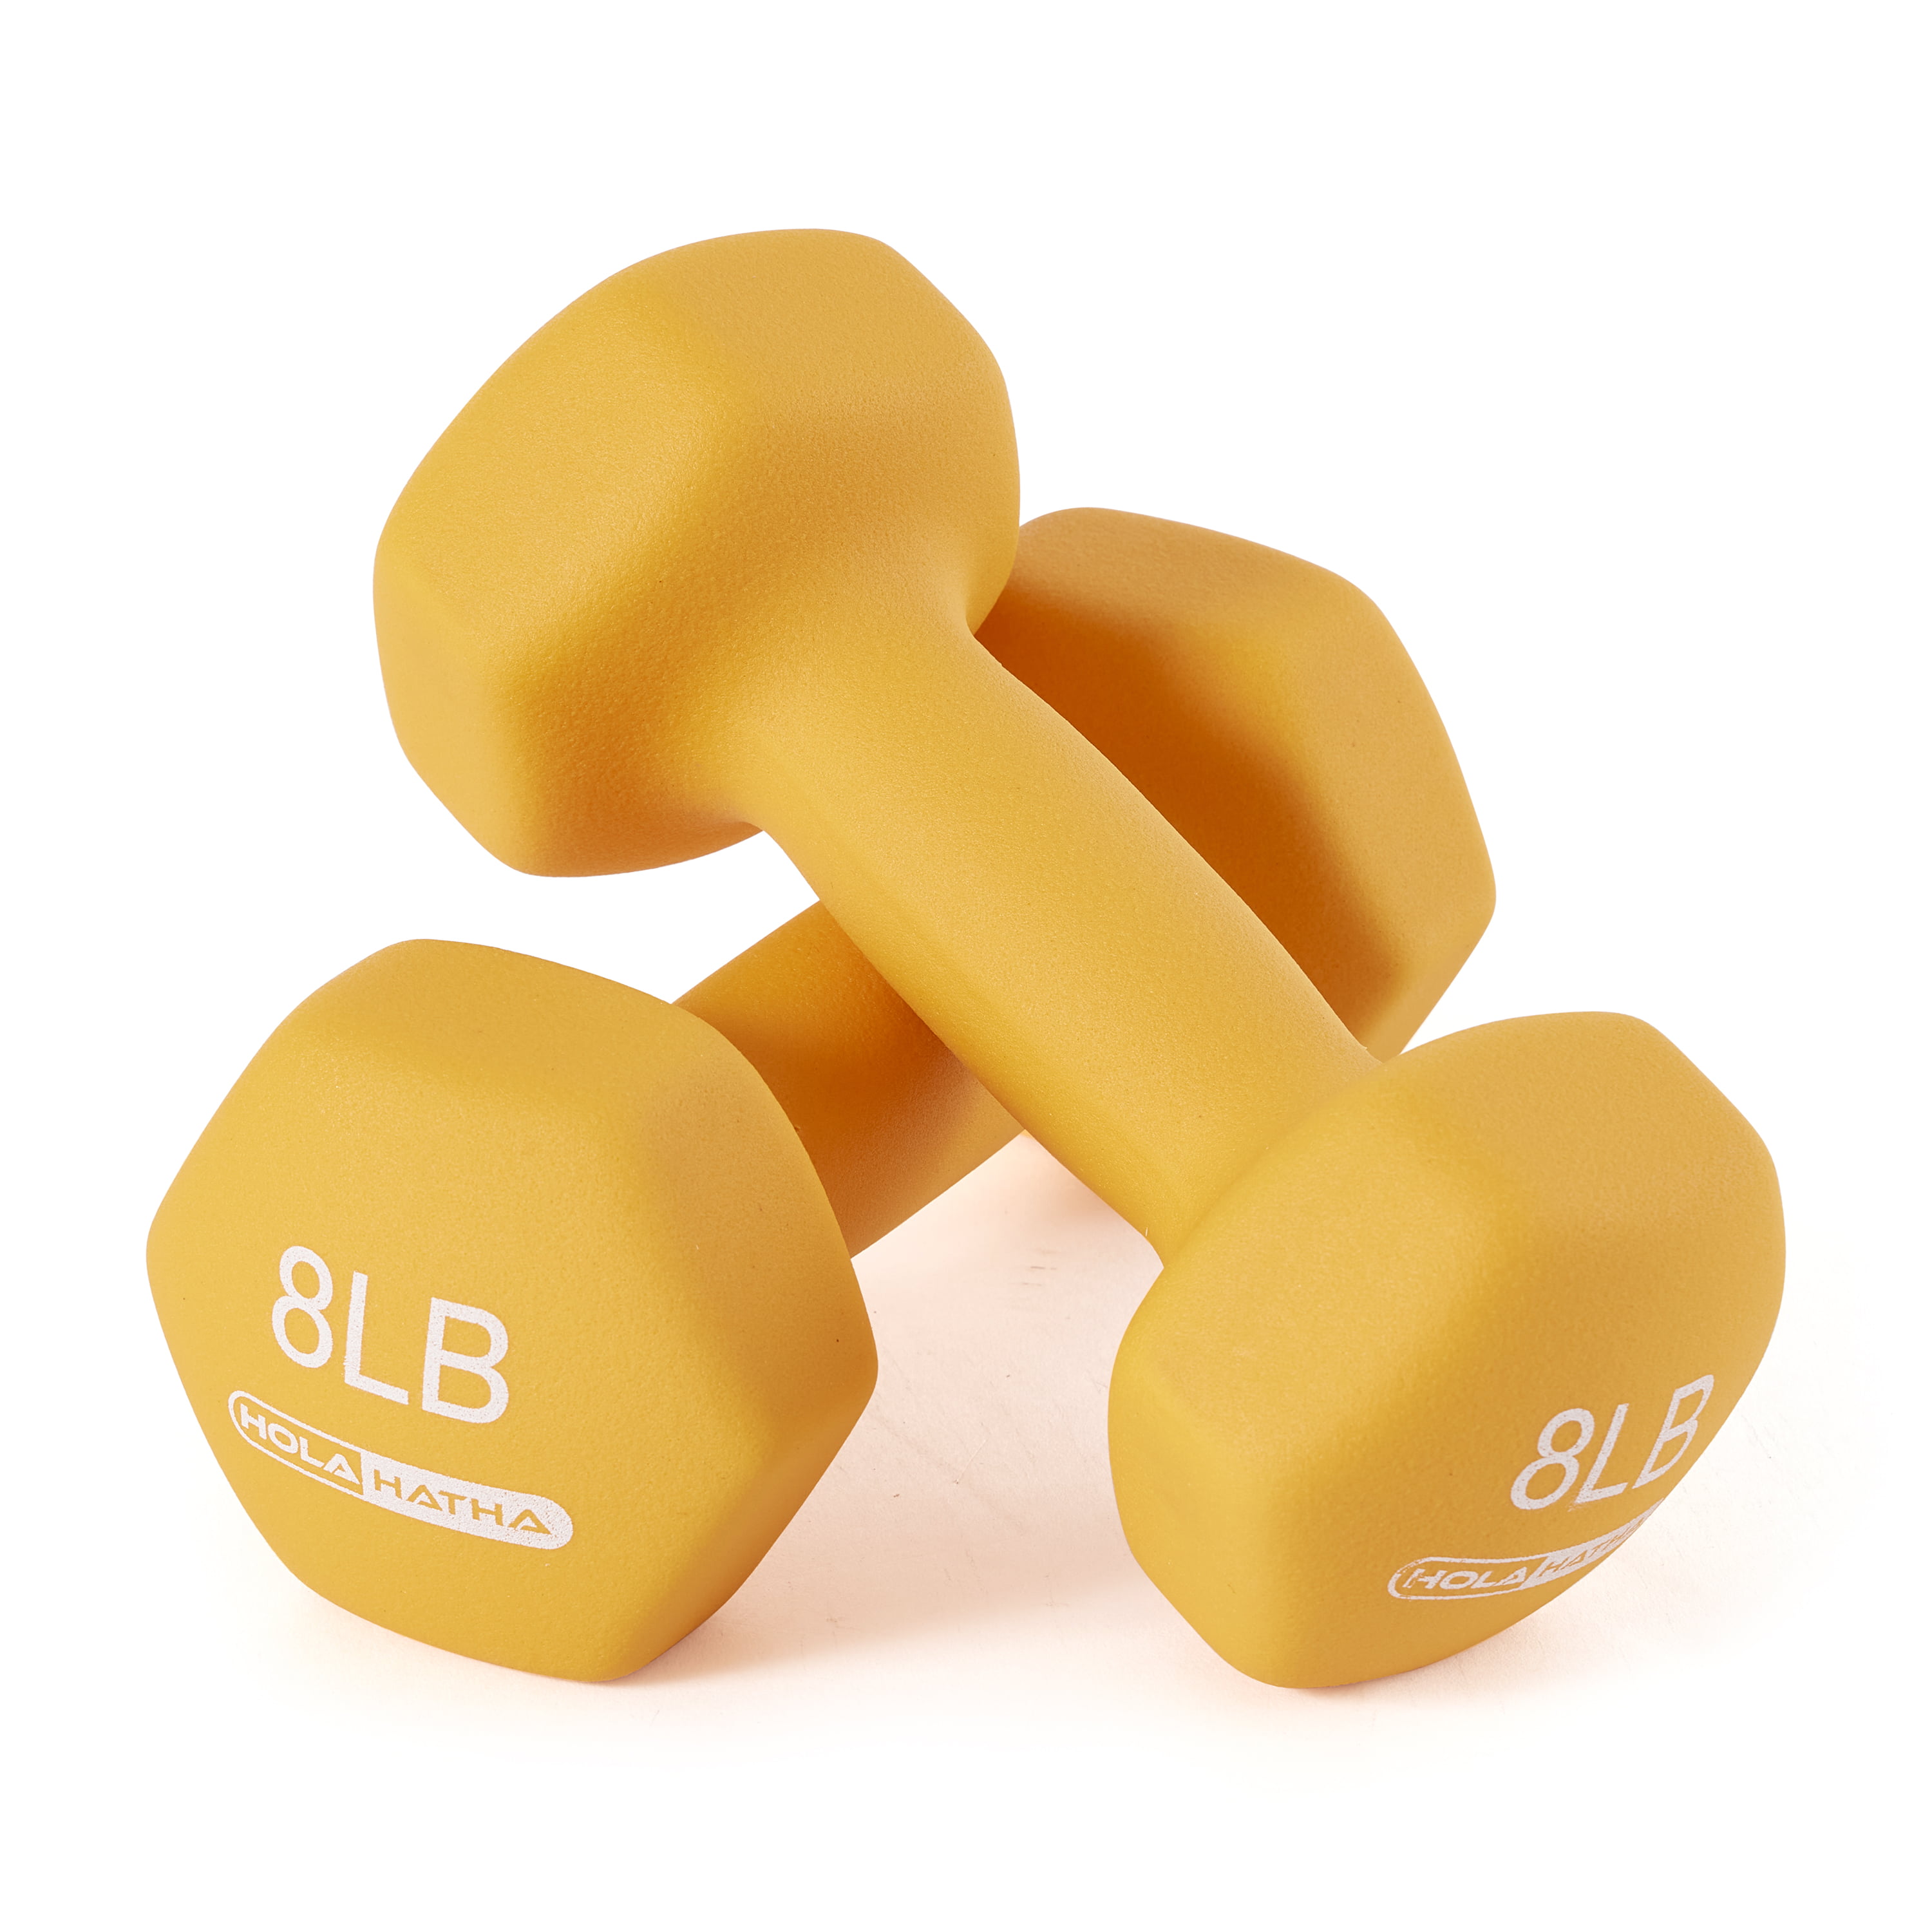 2pc 3/5/8/10lbs All-Purpose Barbell Set Neoprene Coated Dumbbell Weights in pair 